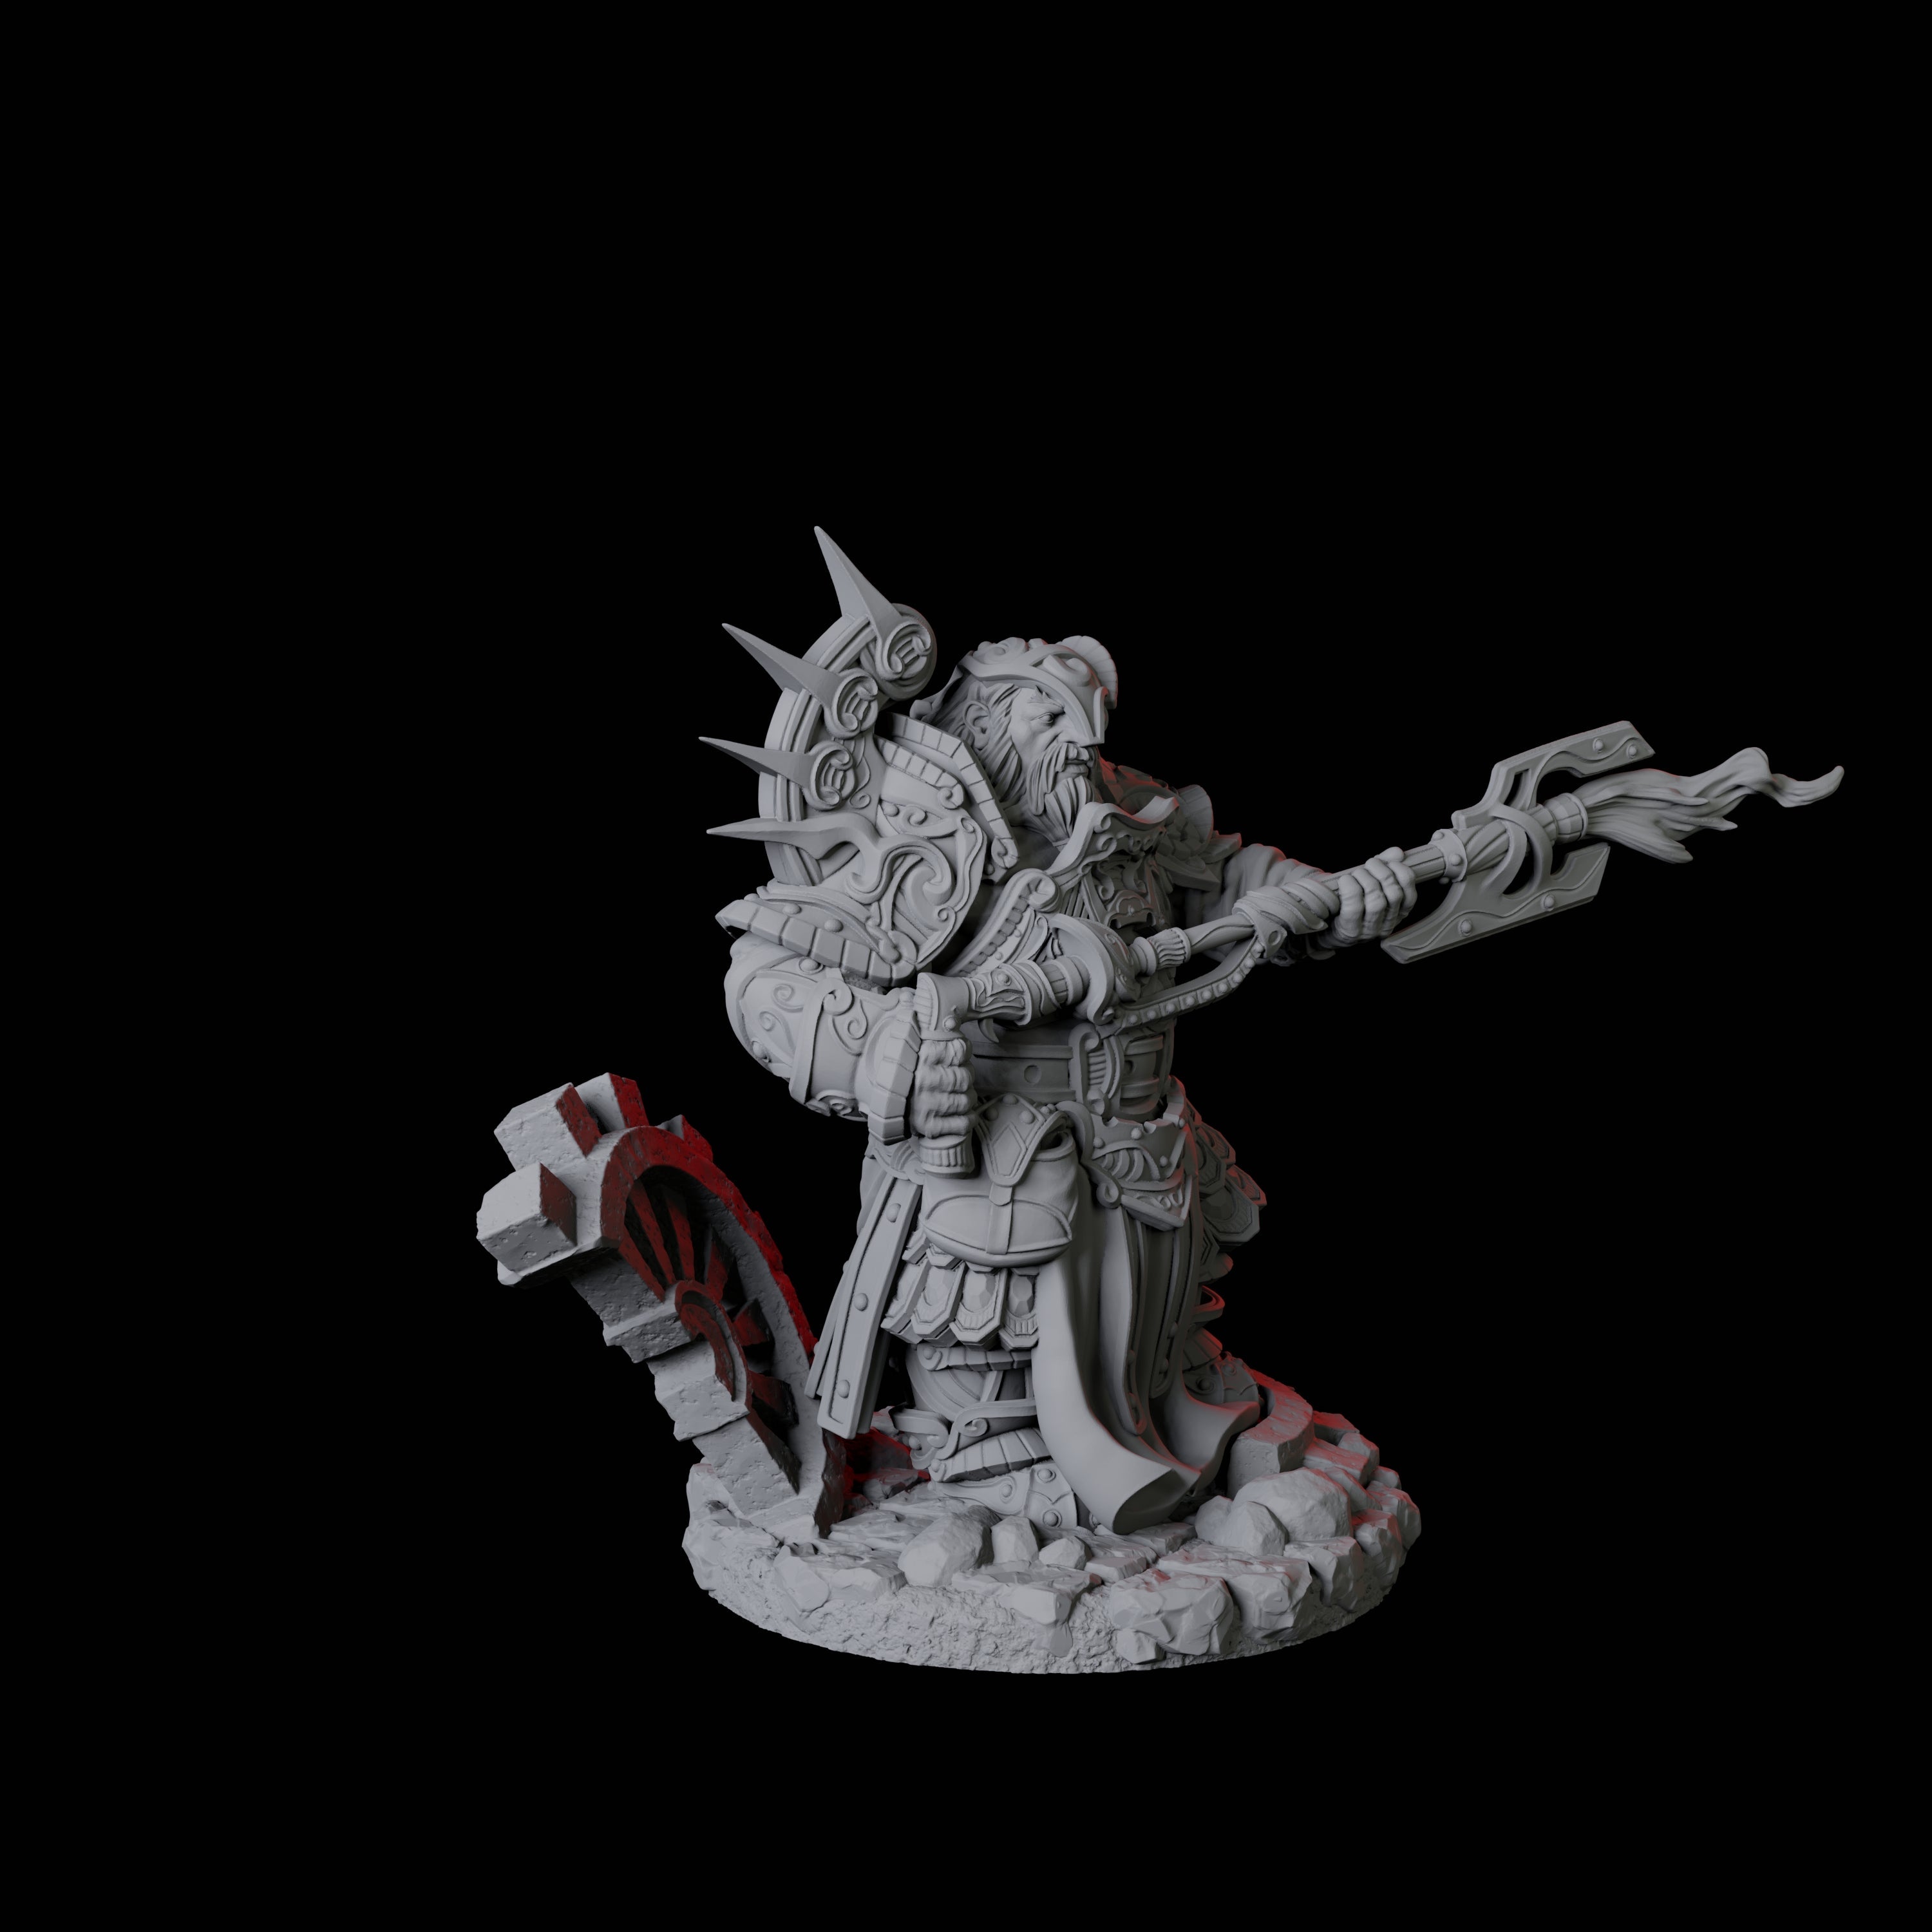 Four Dwarf Artificer Engineers Miniature for Dungeons and Dragons, Pathfinder or other TTRPGs